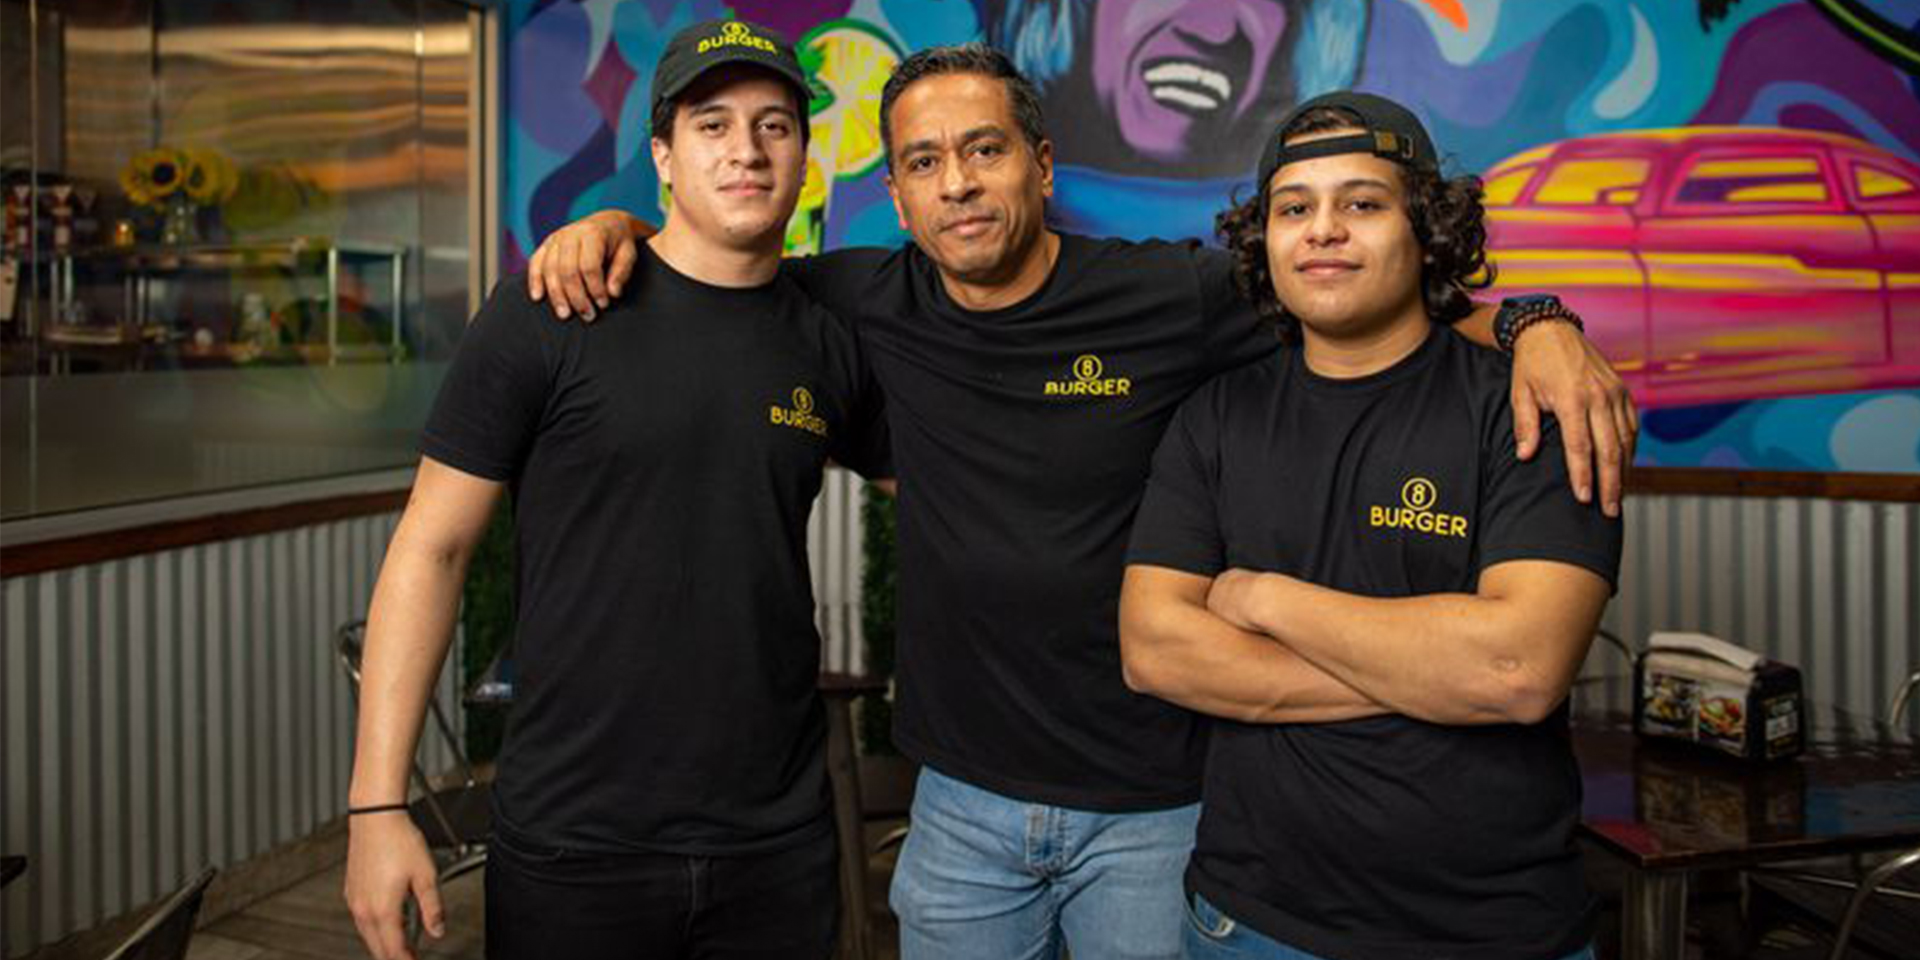 Staff at a restaurant wearing matching black shirts with a colorful background.